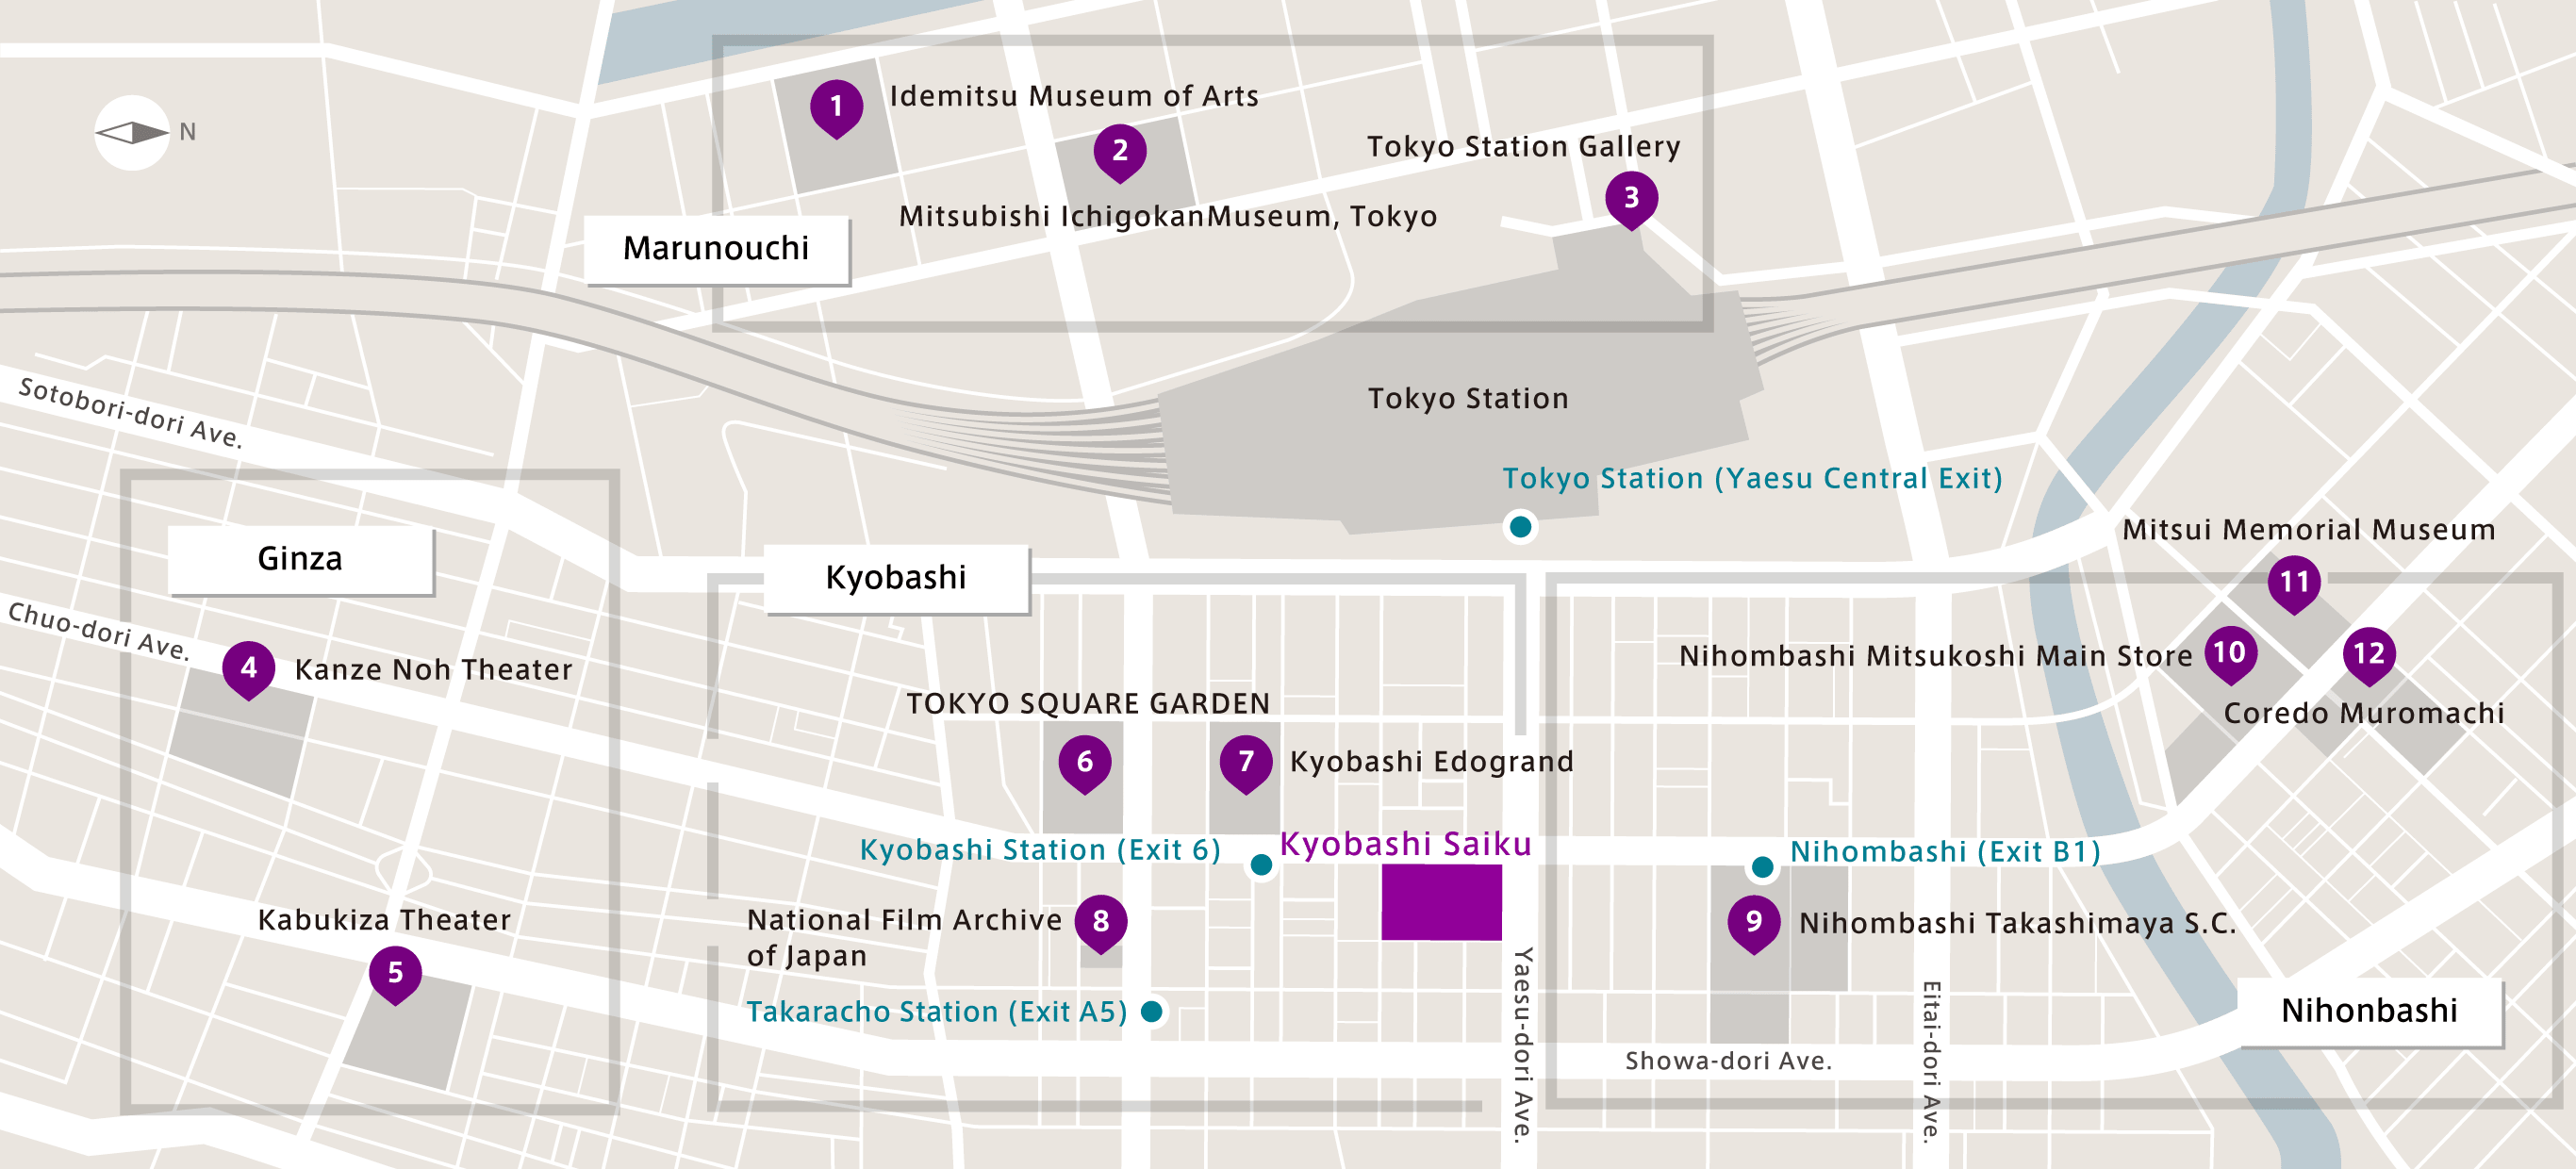 Characteristics of the Area Surrounding Tokyo Station